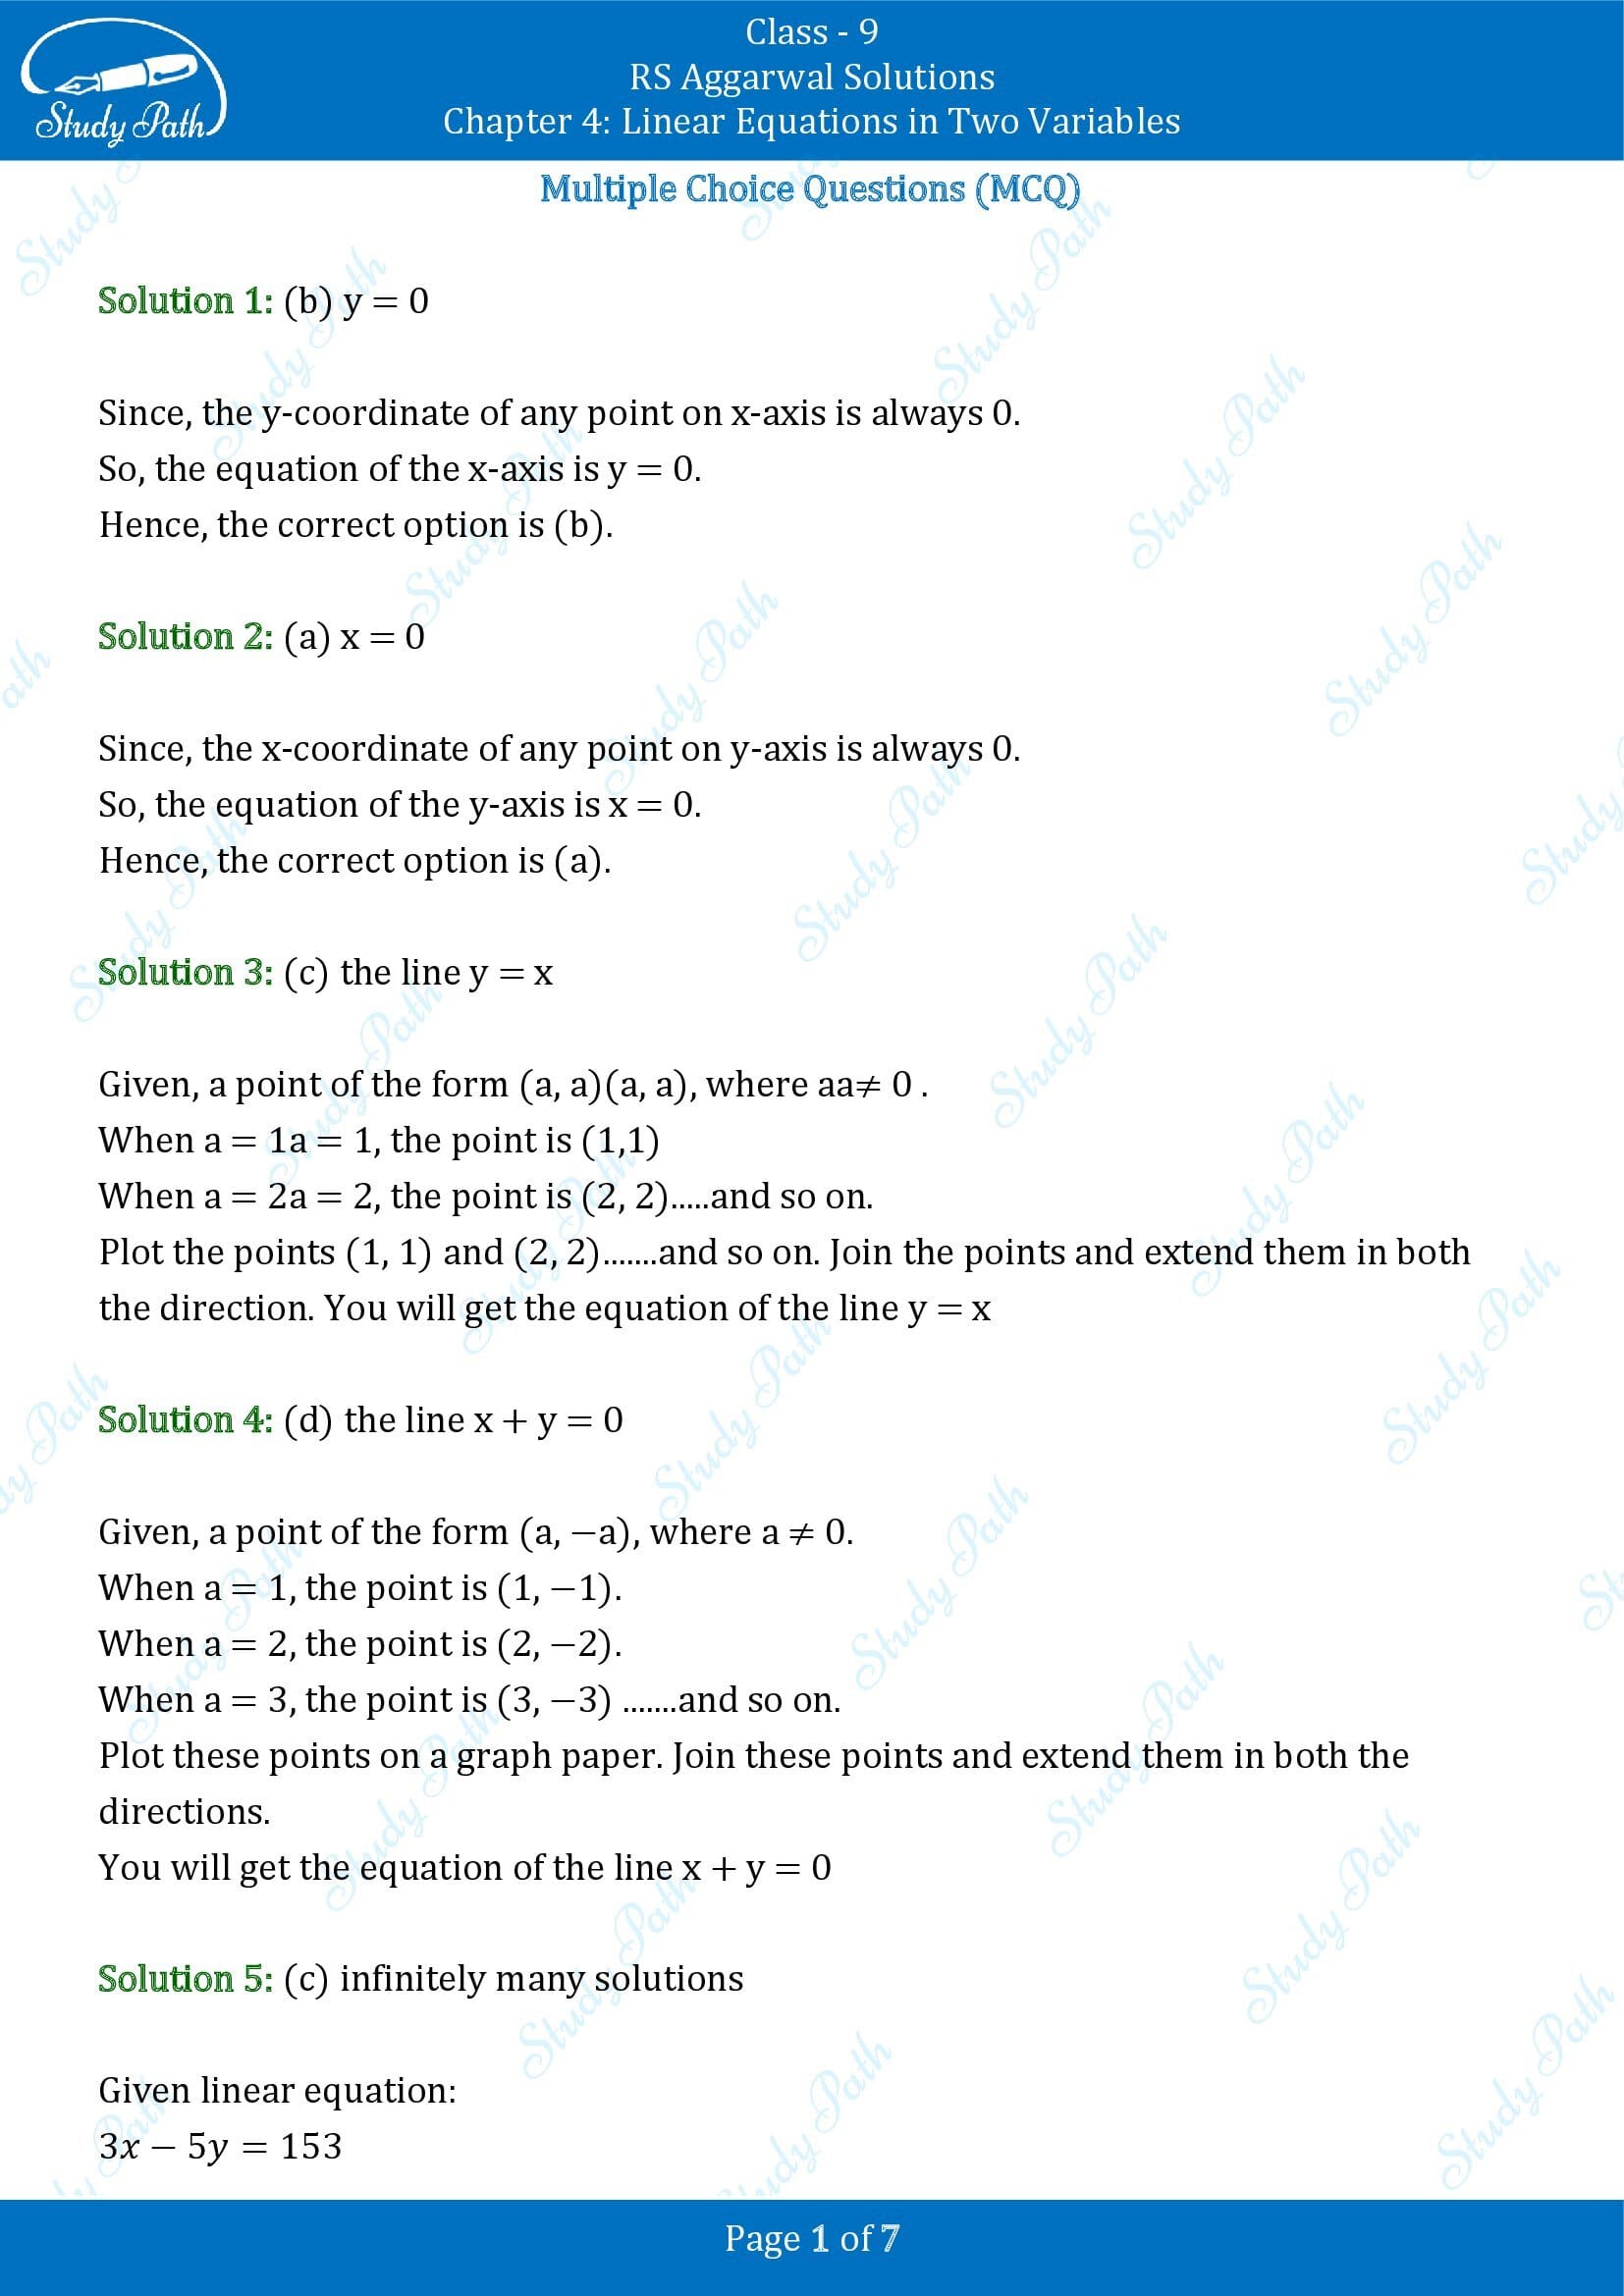 RS Aggarwal Solutions Class 9 Chapter 4 Linear Equations in Two Variables Multiple Choice Questions MCQs 00001